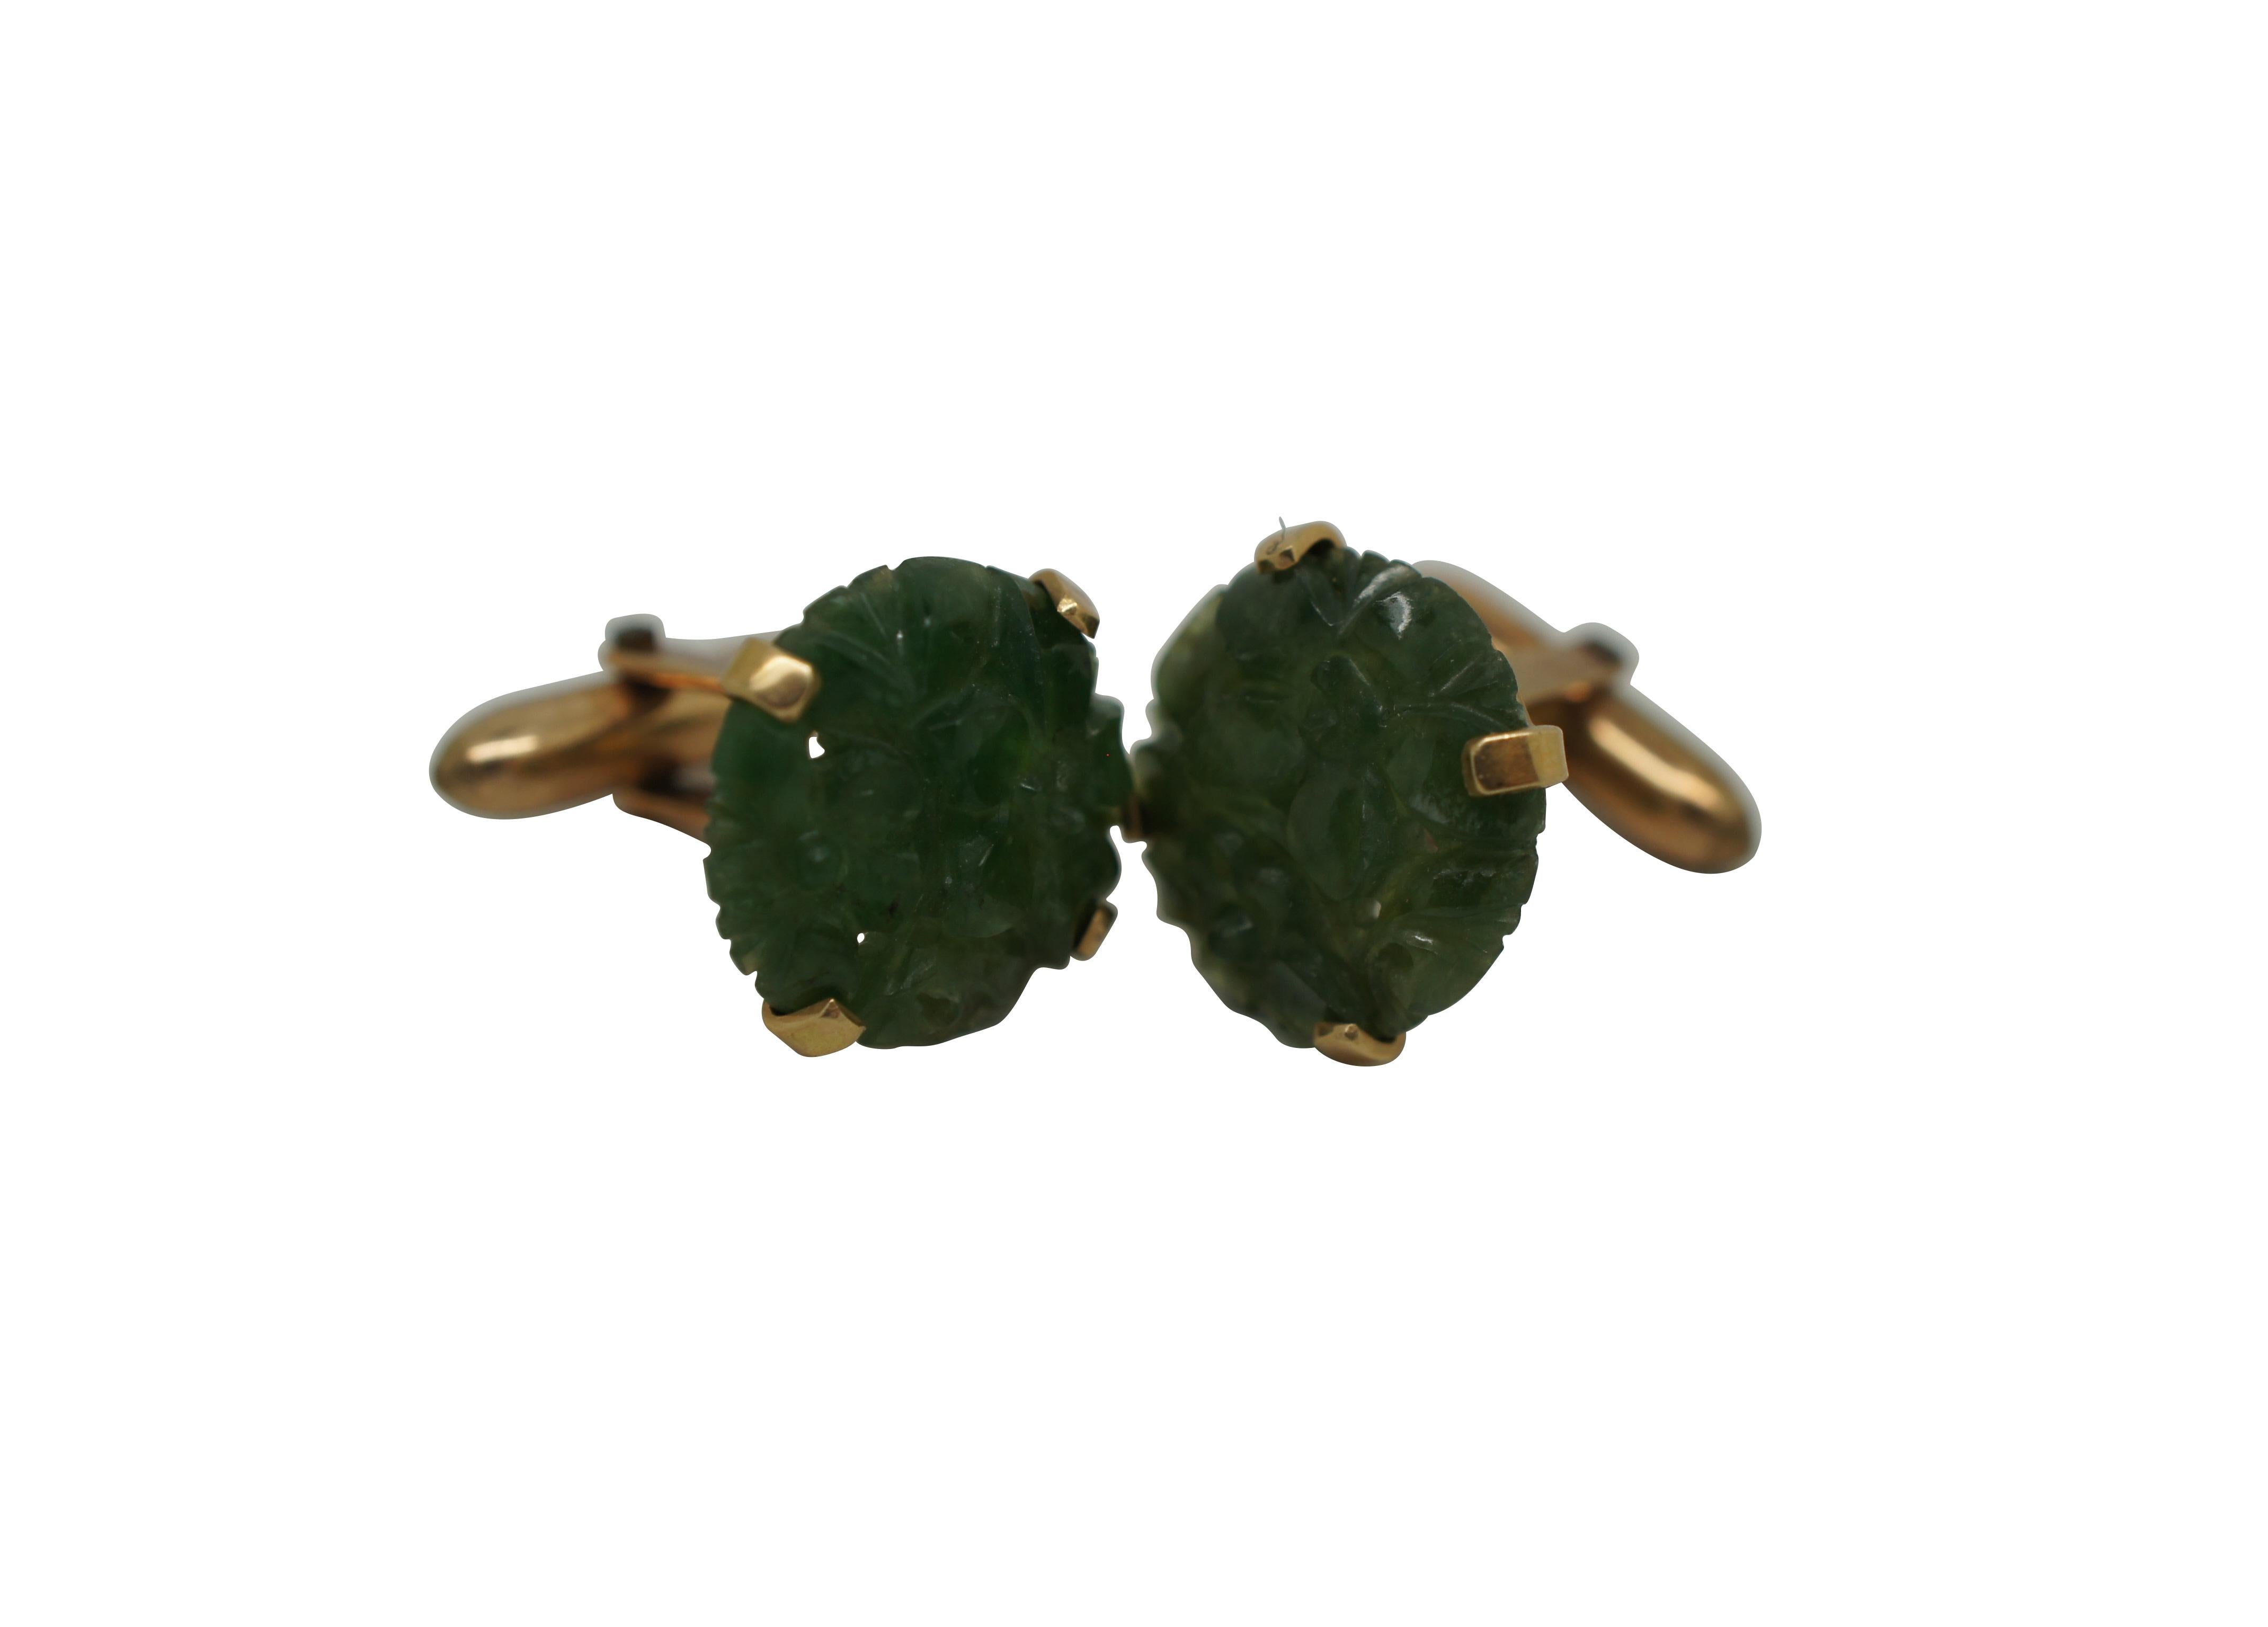 Vintage 10k yellow gold and carved jade flower cufflinks.

Dimensions:
0.5” x 0.75” x 0.5” (Width x Depth x Height) / Combined Weight - 6.9 g